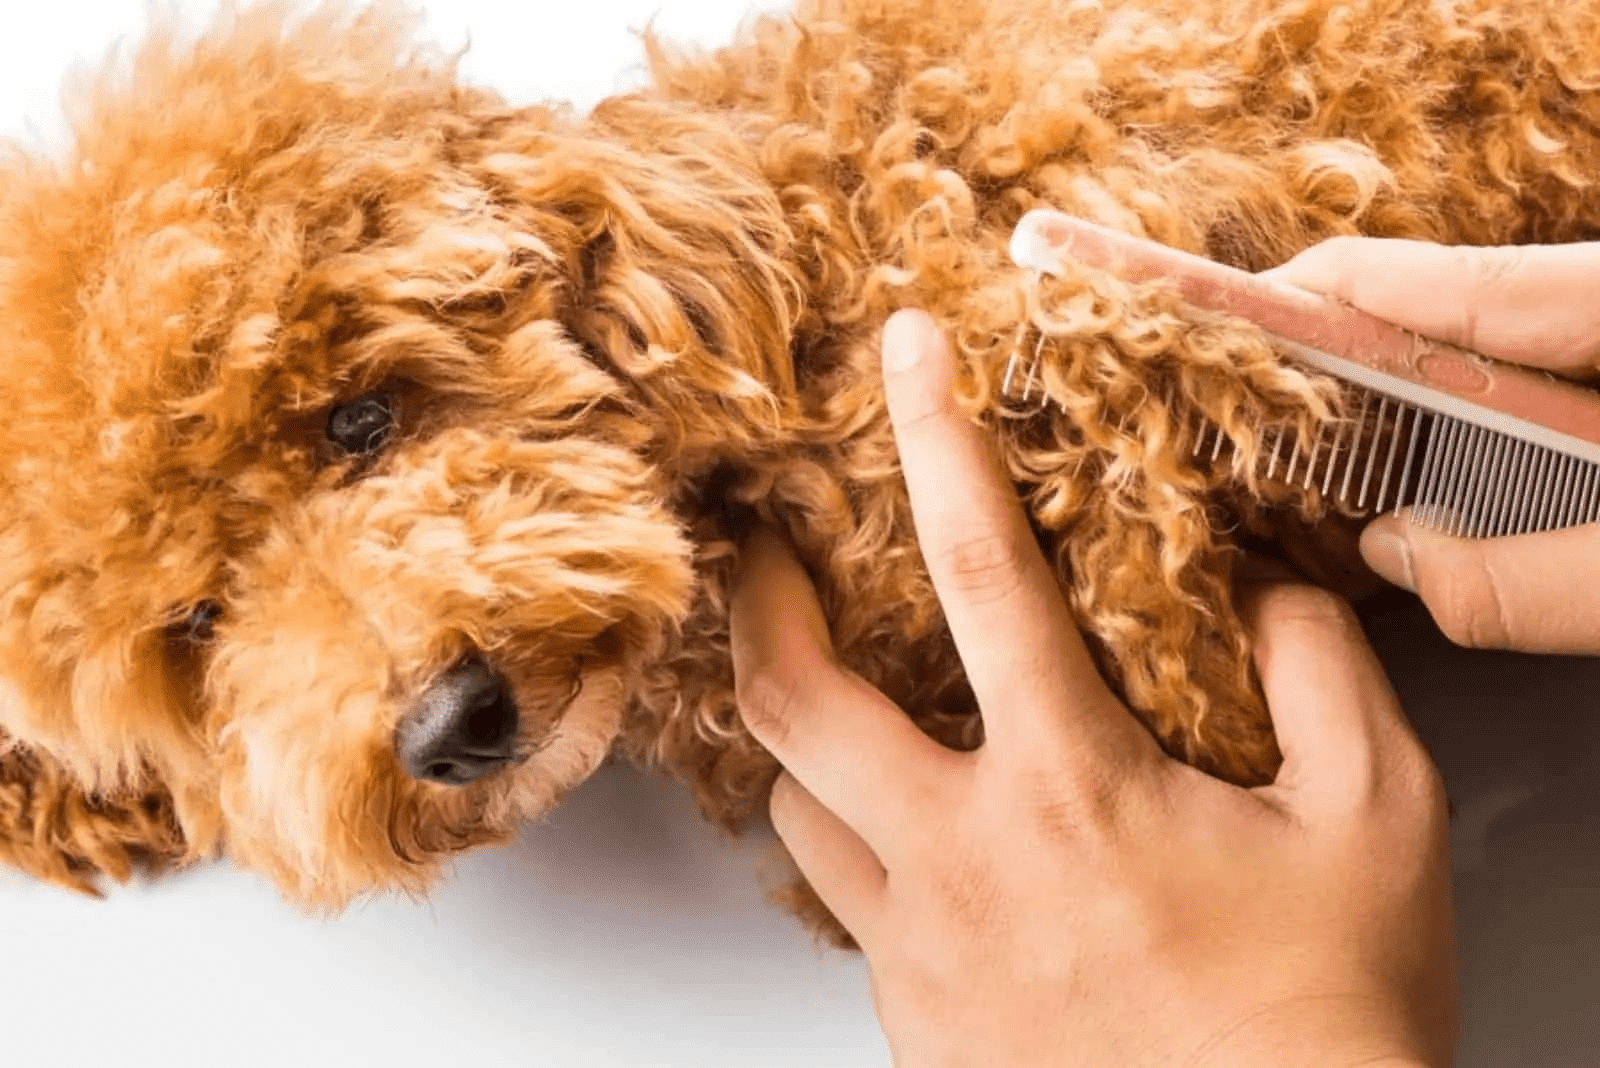 9 Best Brushes For A Cavapoo For Grooming Like A Pro